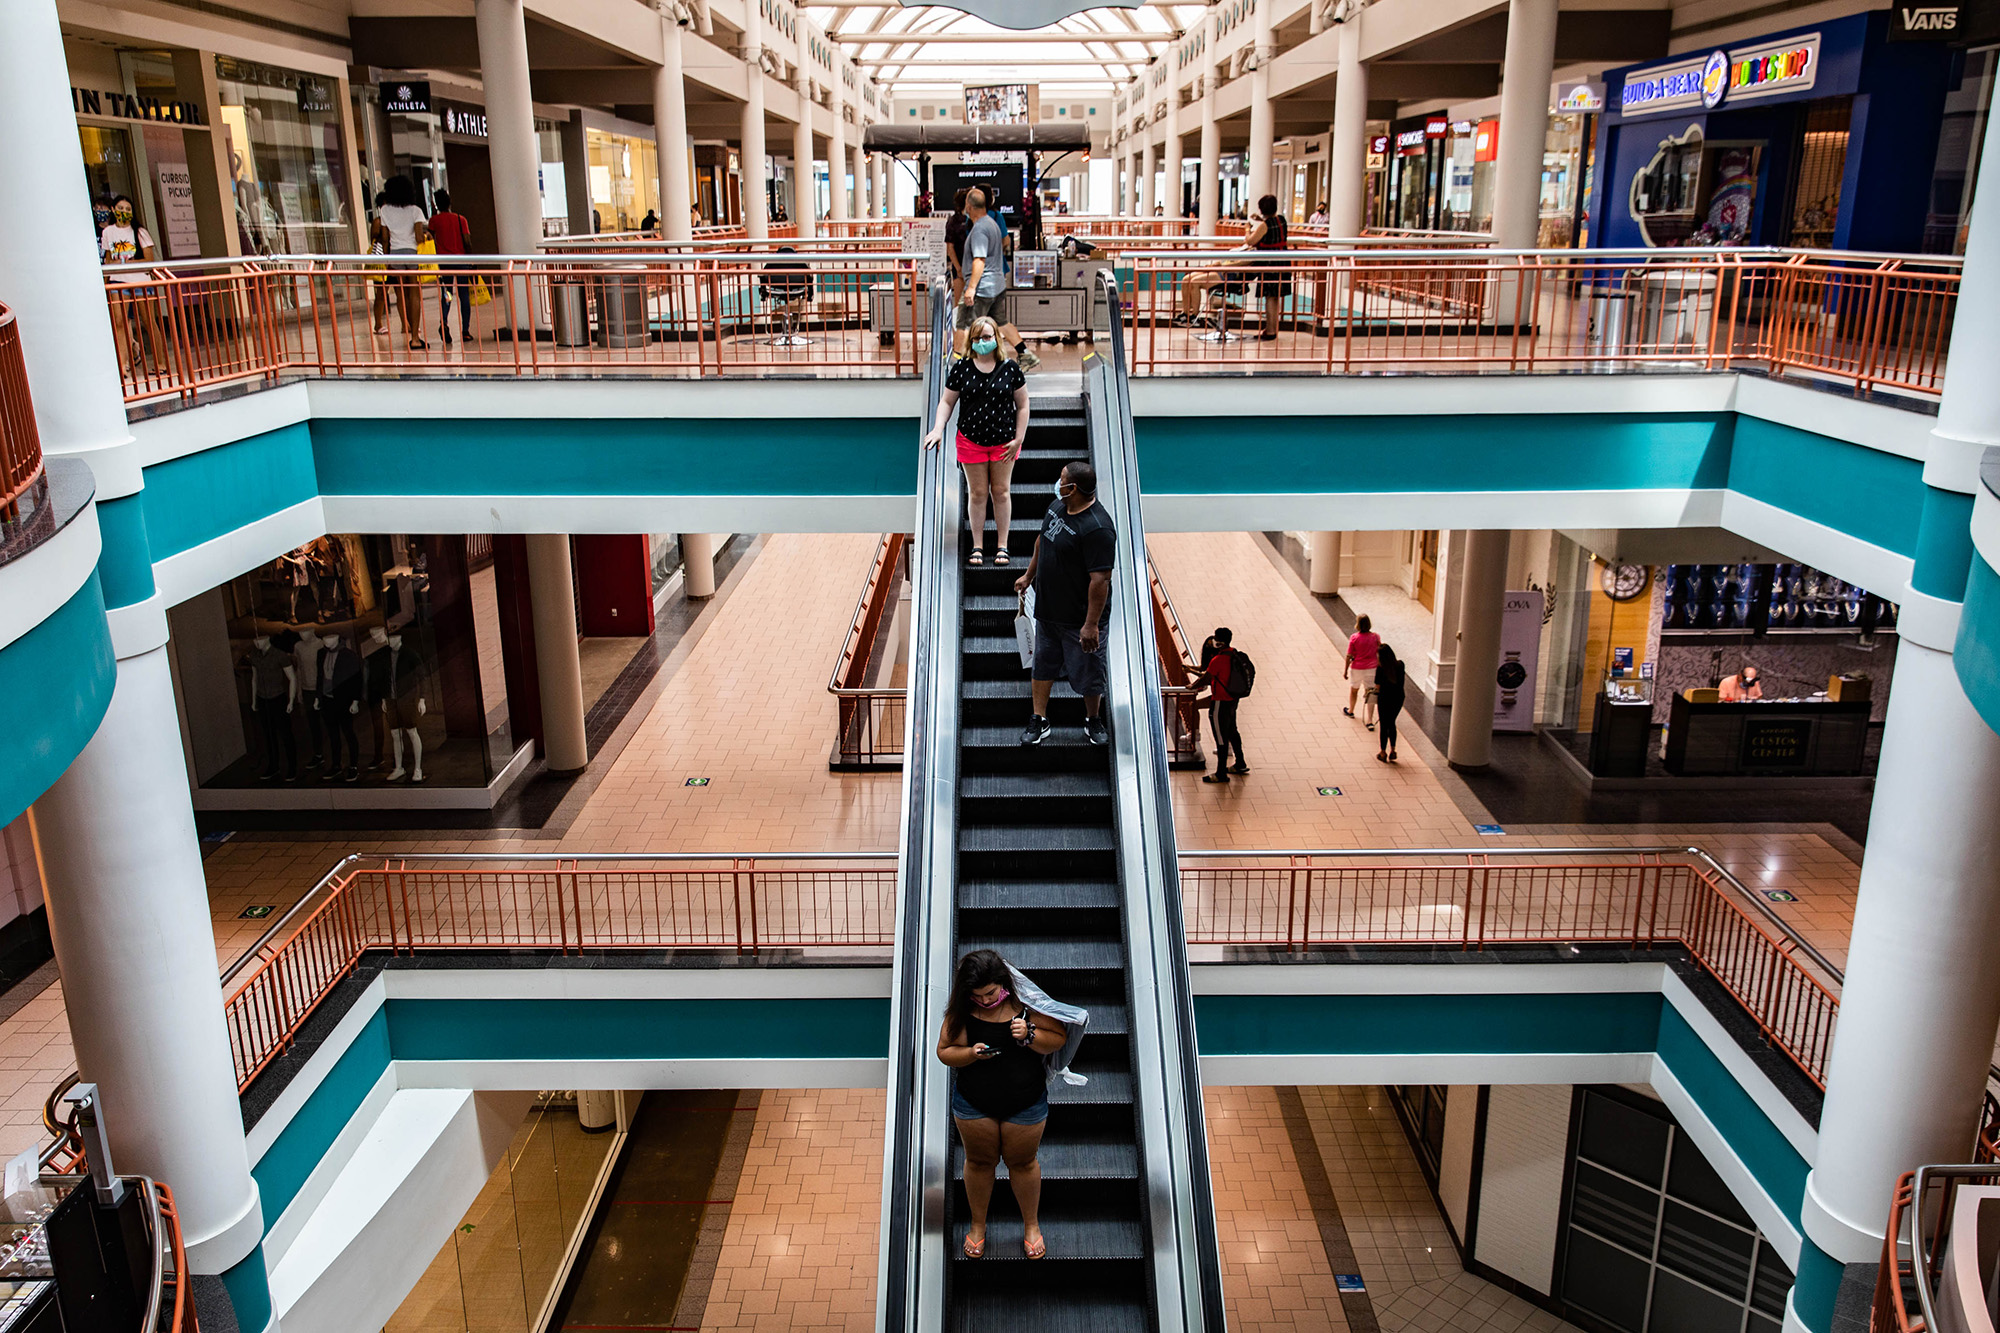 An Outsider's Guide to The Galleria